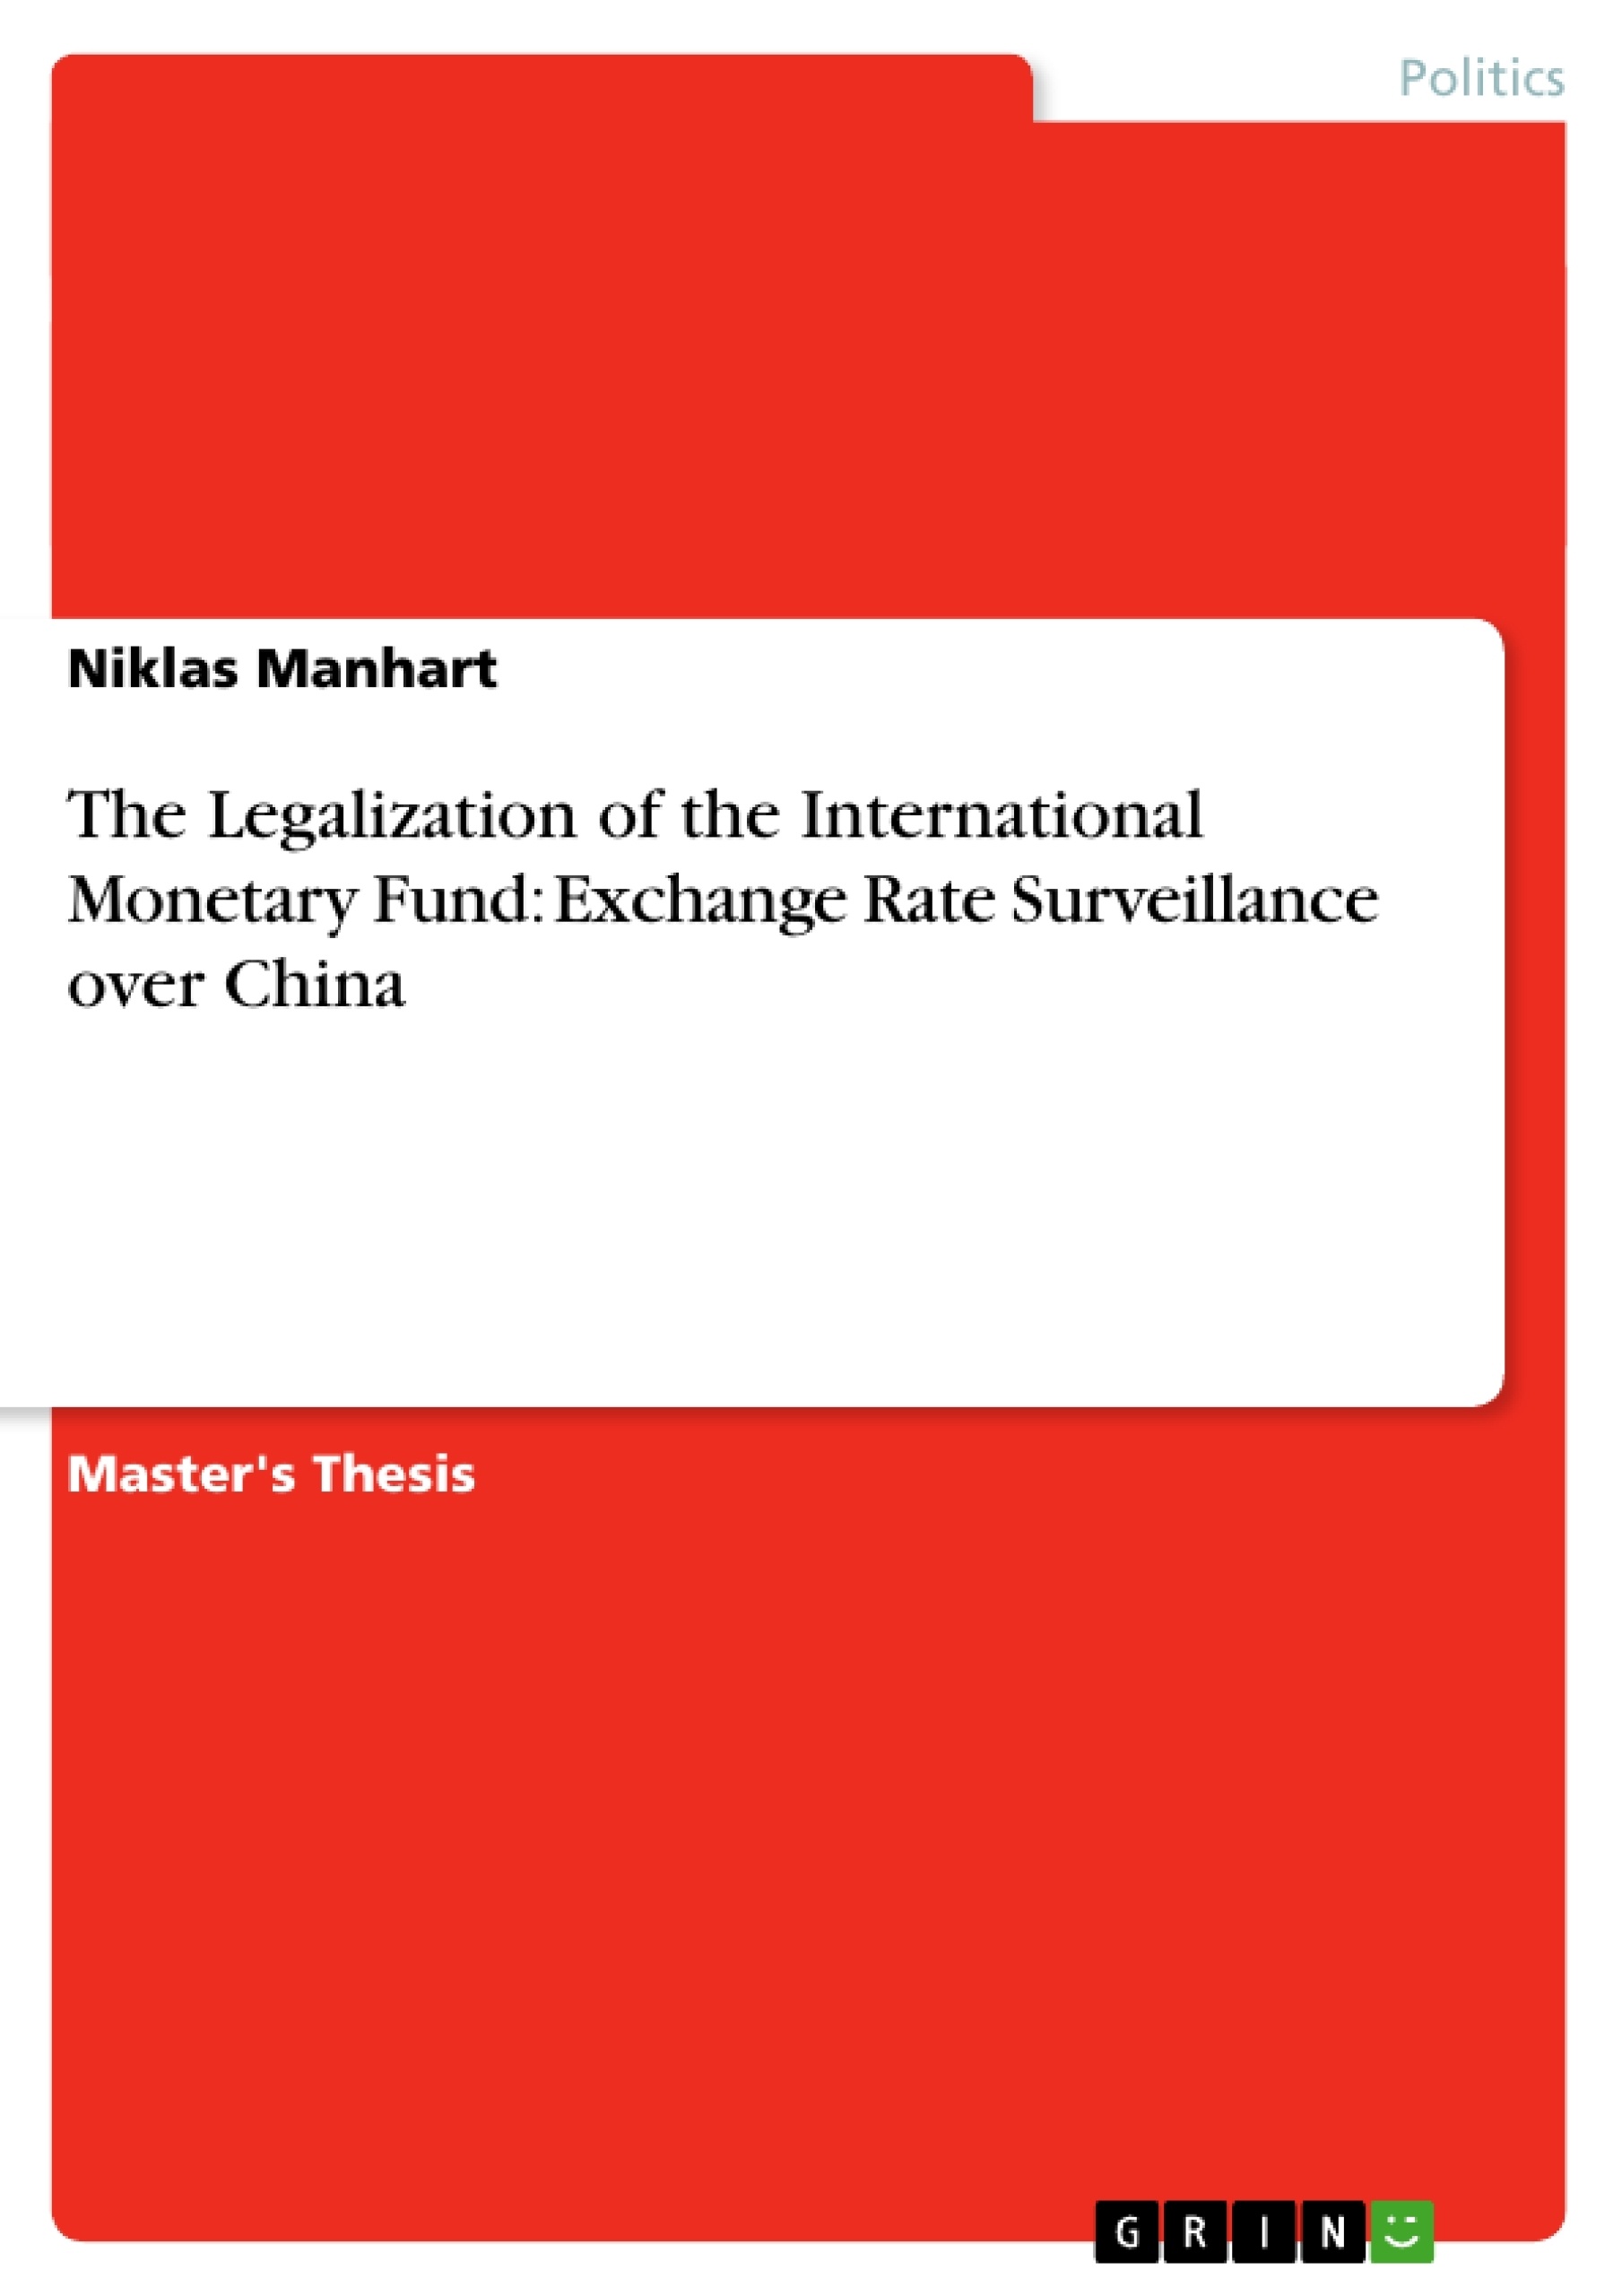 Title: The Legalization of the International Monetary Fund: Exchange Rate Surveillance over China